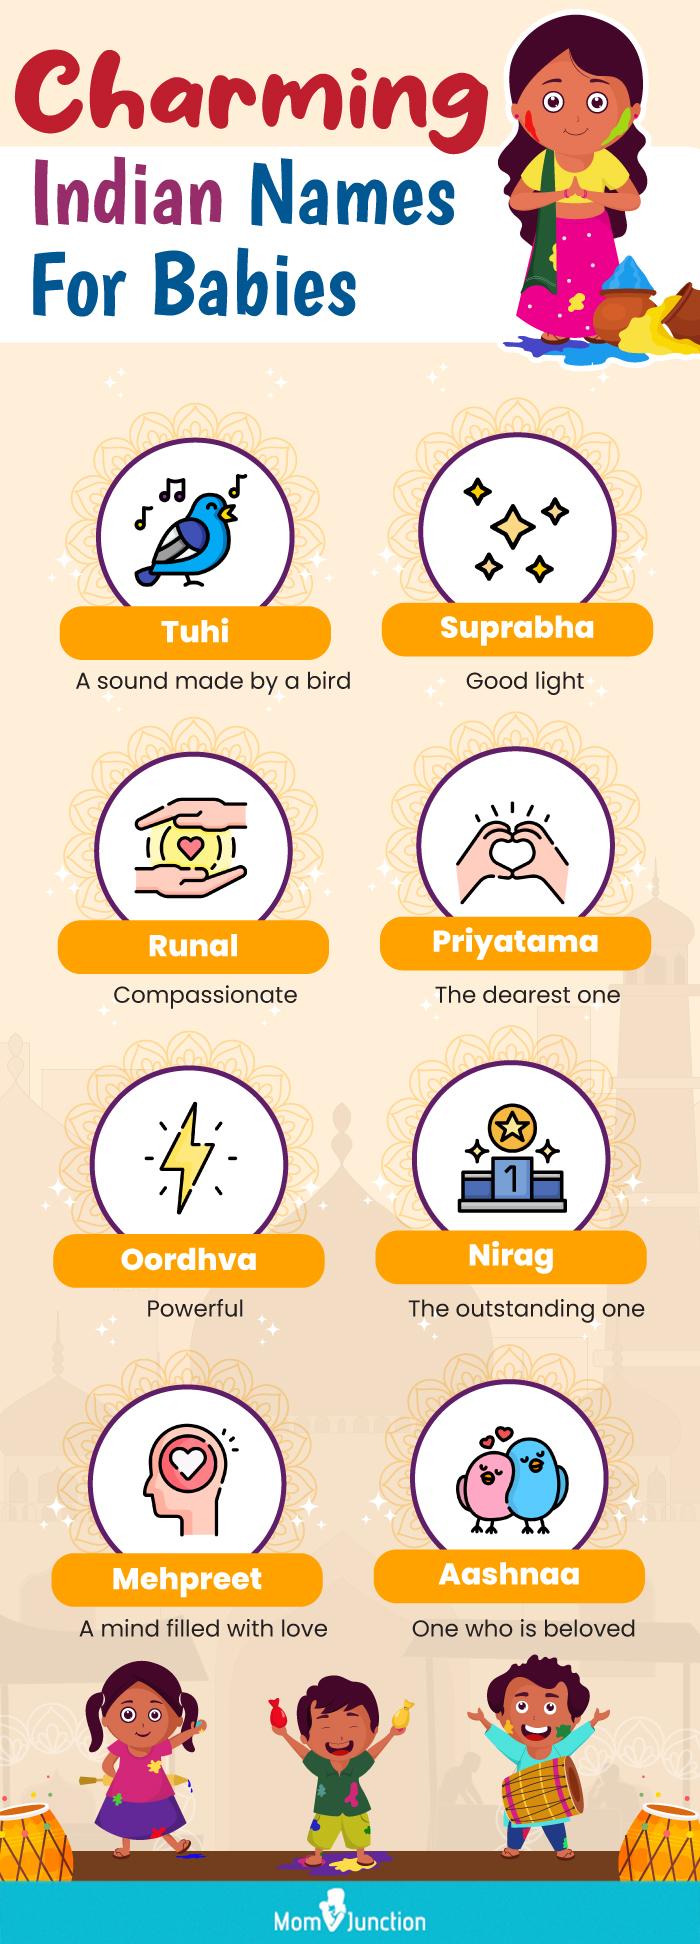 charming indian names for babies (infographic)